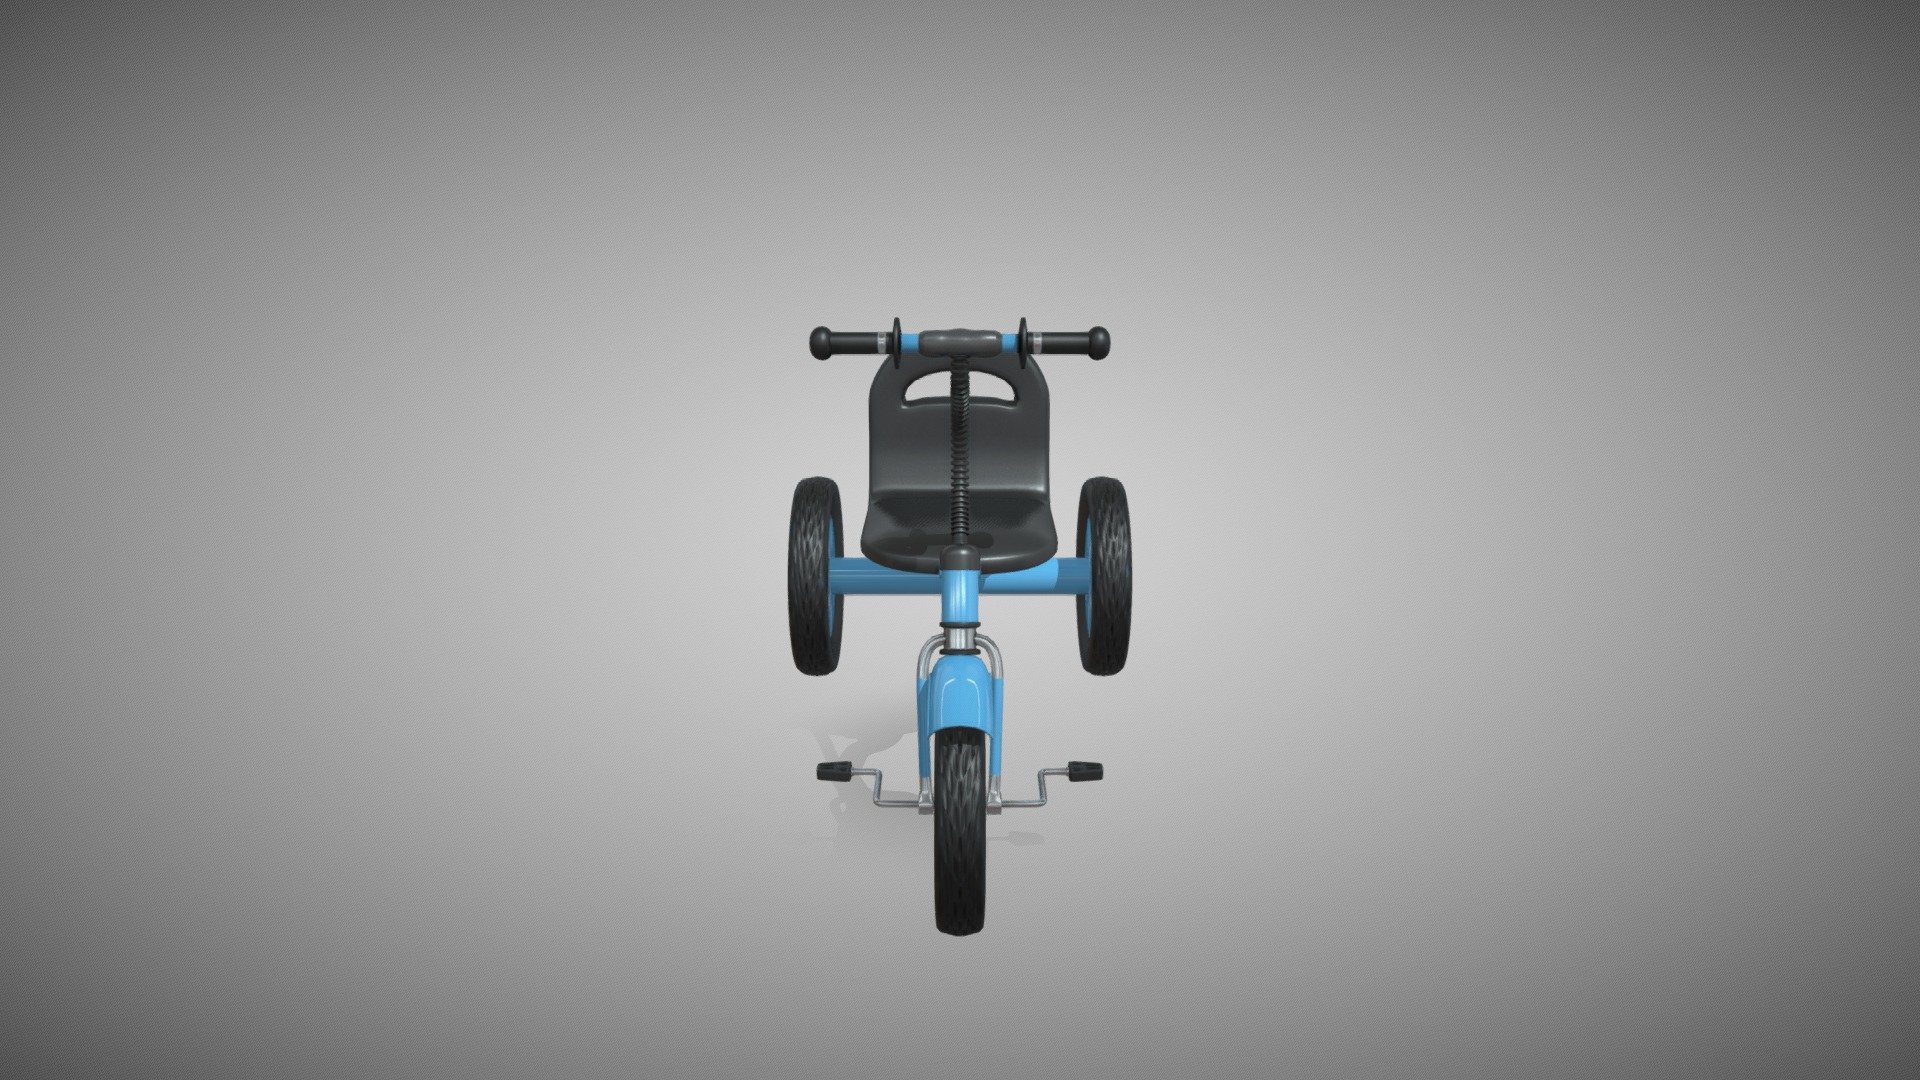 Take a spin through nostalgia with our Tricycle 3D Model! 🚲✨ This meticulously crafted model brings back the joy of childhood adventures and carefree rides. Get up close to the intricate details and charming design of this classic trike, perfect for adding a touch of vintage charm to your 3D projects. Whether you're a 3D artist, a design enthusiast, or simply a lover of timeless classics, our tricycle model is sure to inspire creativity and a sense of wonder. Hop on and explore the world of 3D with this delightful addition to your collection! 🌈🛴 


3DModel #Tricycle #Nostalgia #Sketchfab - Child Tricycle - Buy Royalty Free 3D model by Sujit Mishra (@sujitanshumishra) 3d model